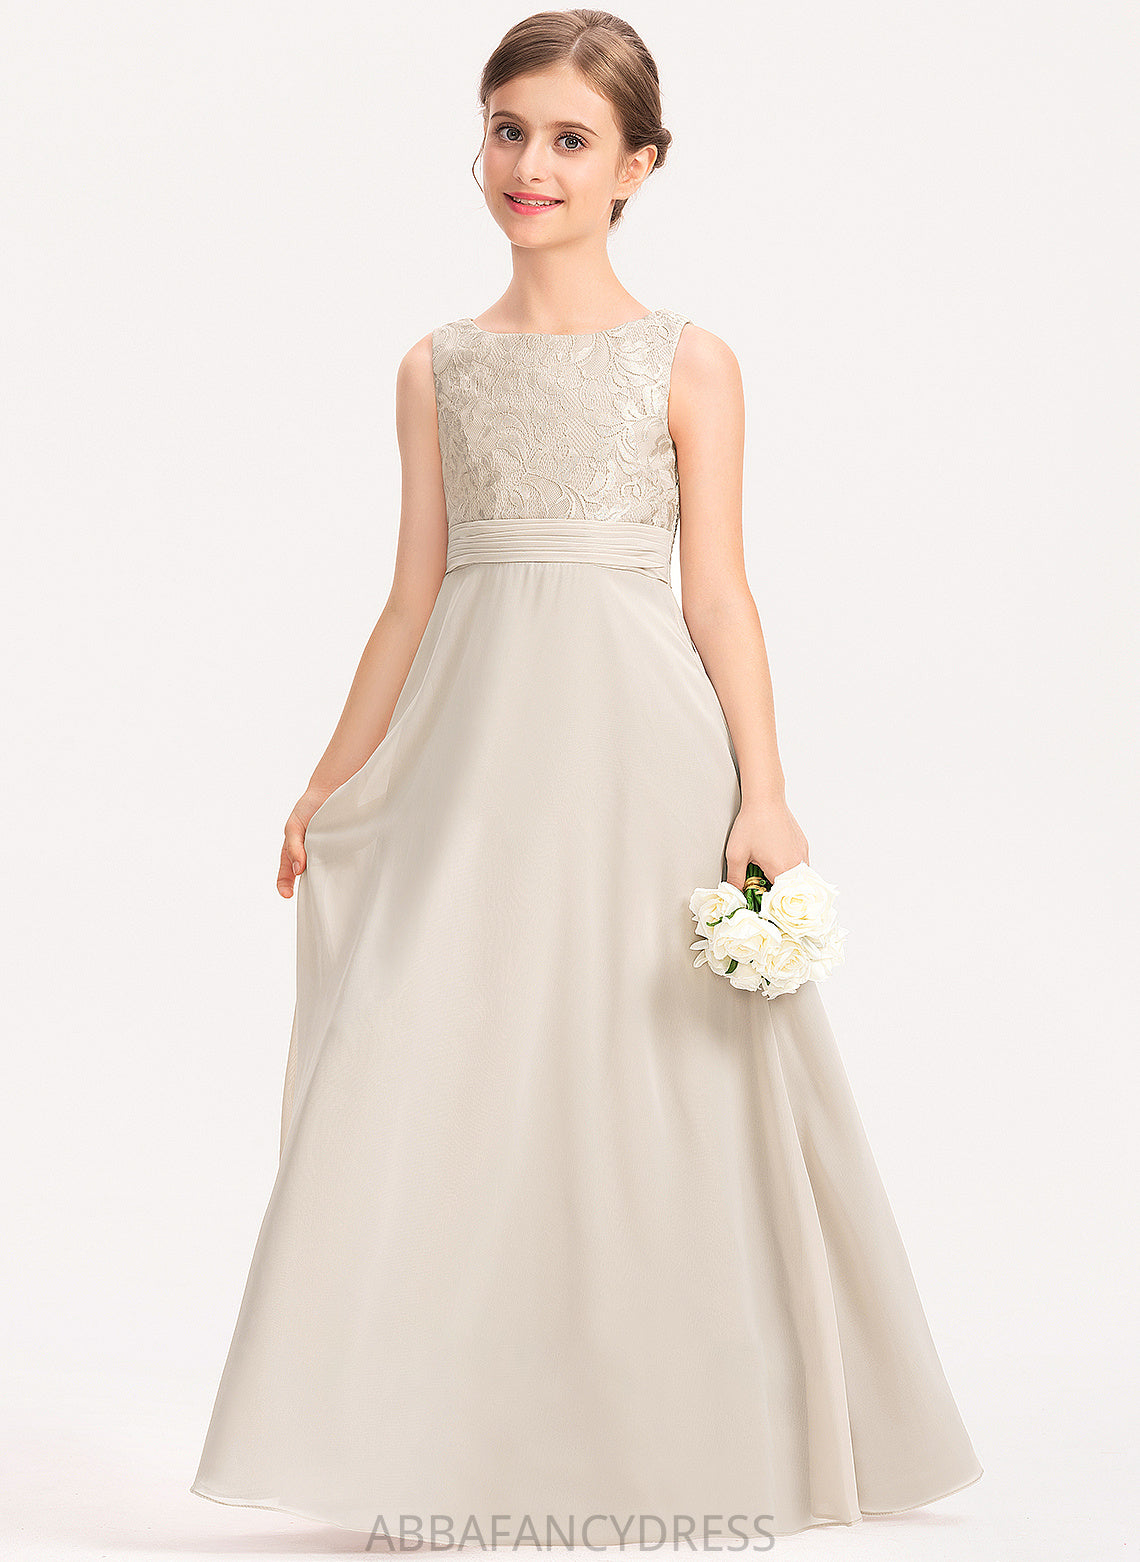 With A-Line Chiffon Floor-Length Junior Bridesmaid Dresses Lace Neck Kenley Ruffle Scoop